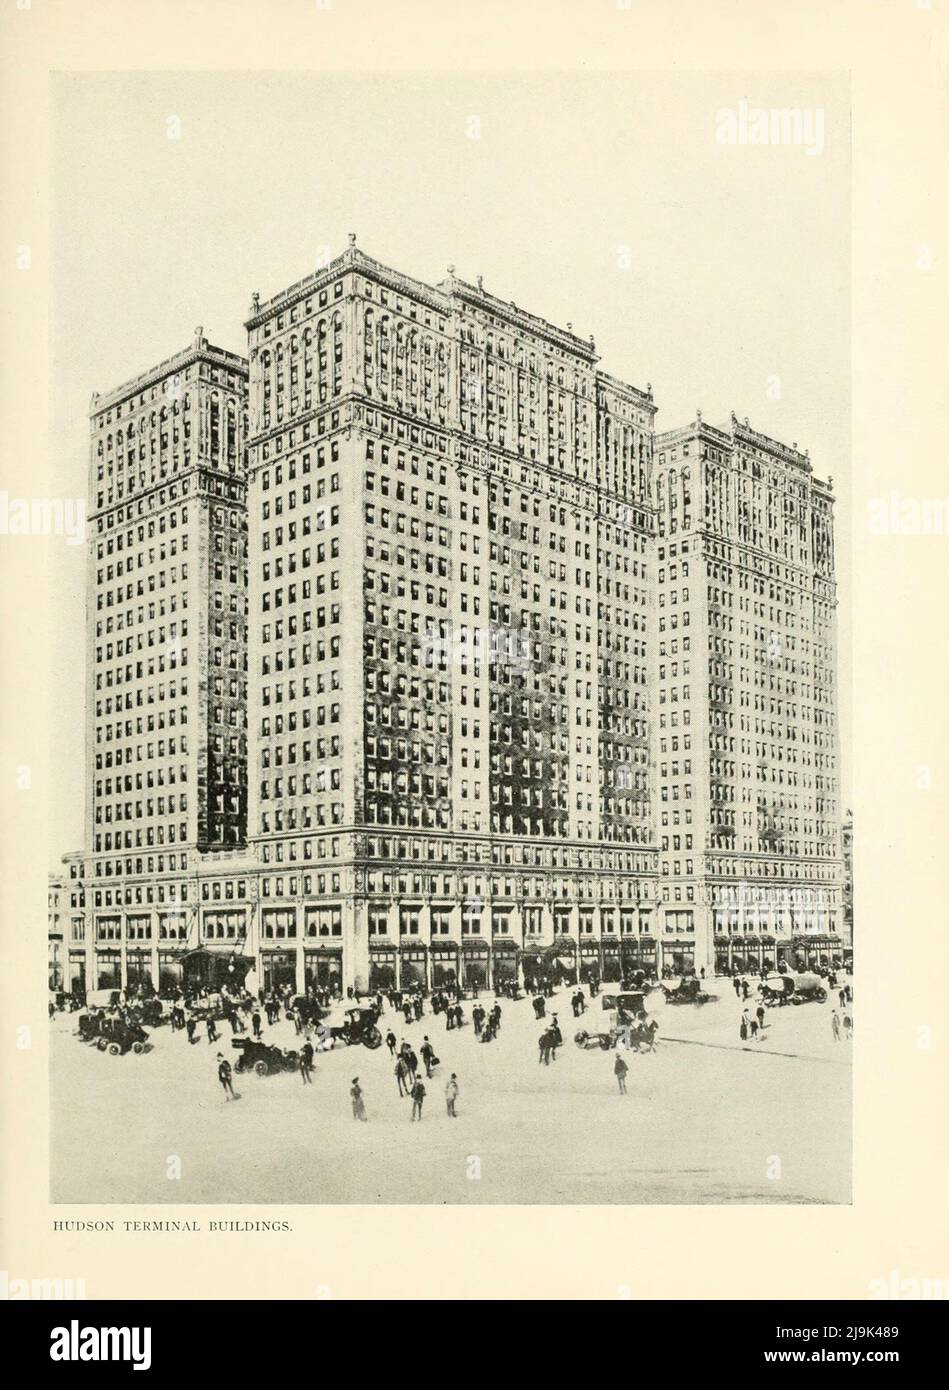 Hudson Terminal Buildings 1911 from the book ' New York illustrated ' Publication date 1911 Publisher New York : Success Postal Card Co. Stock Photo